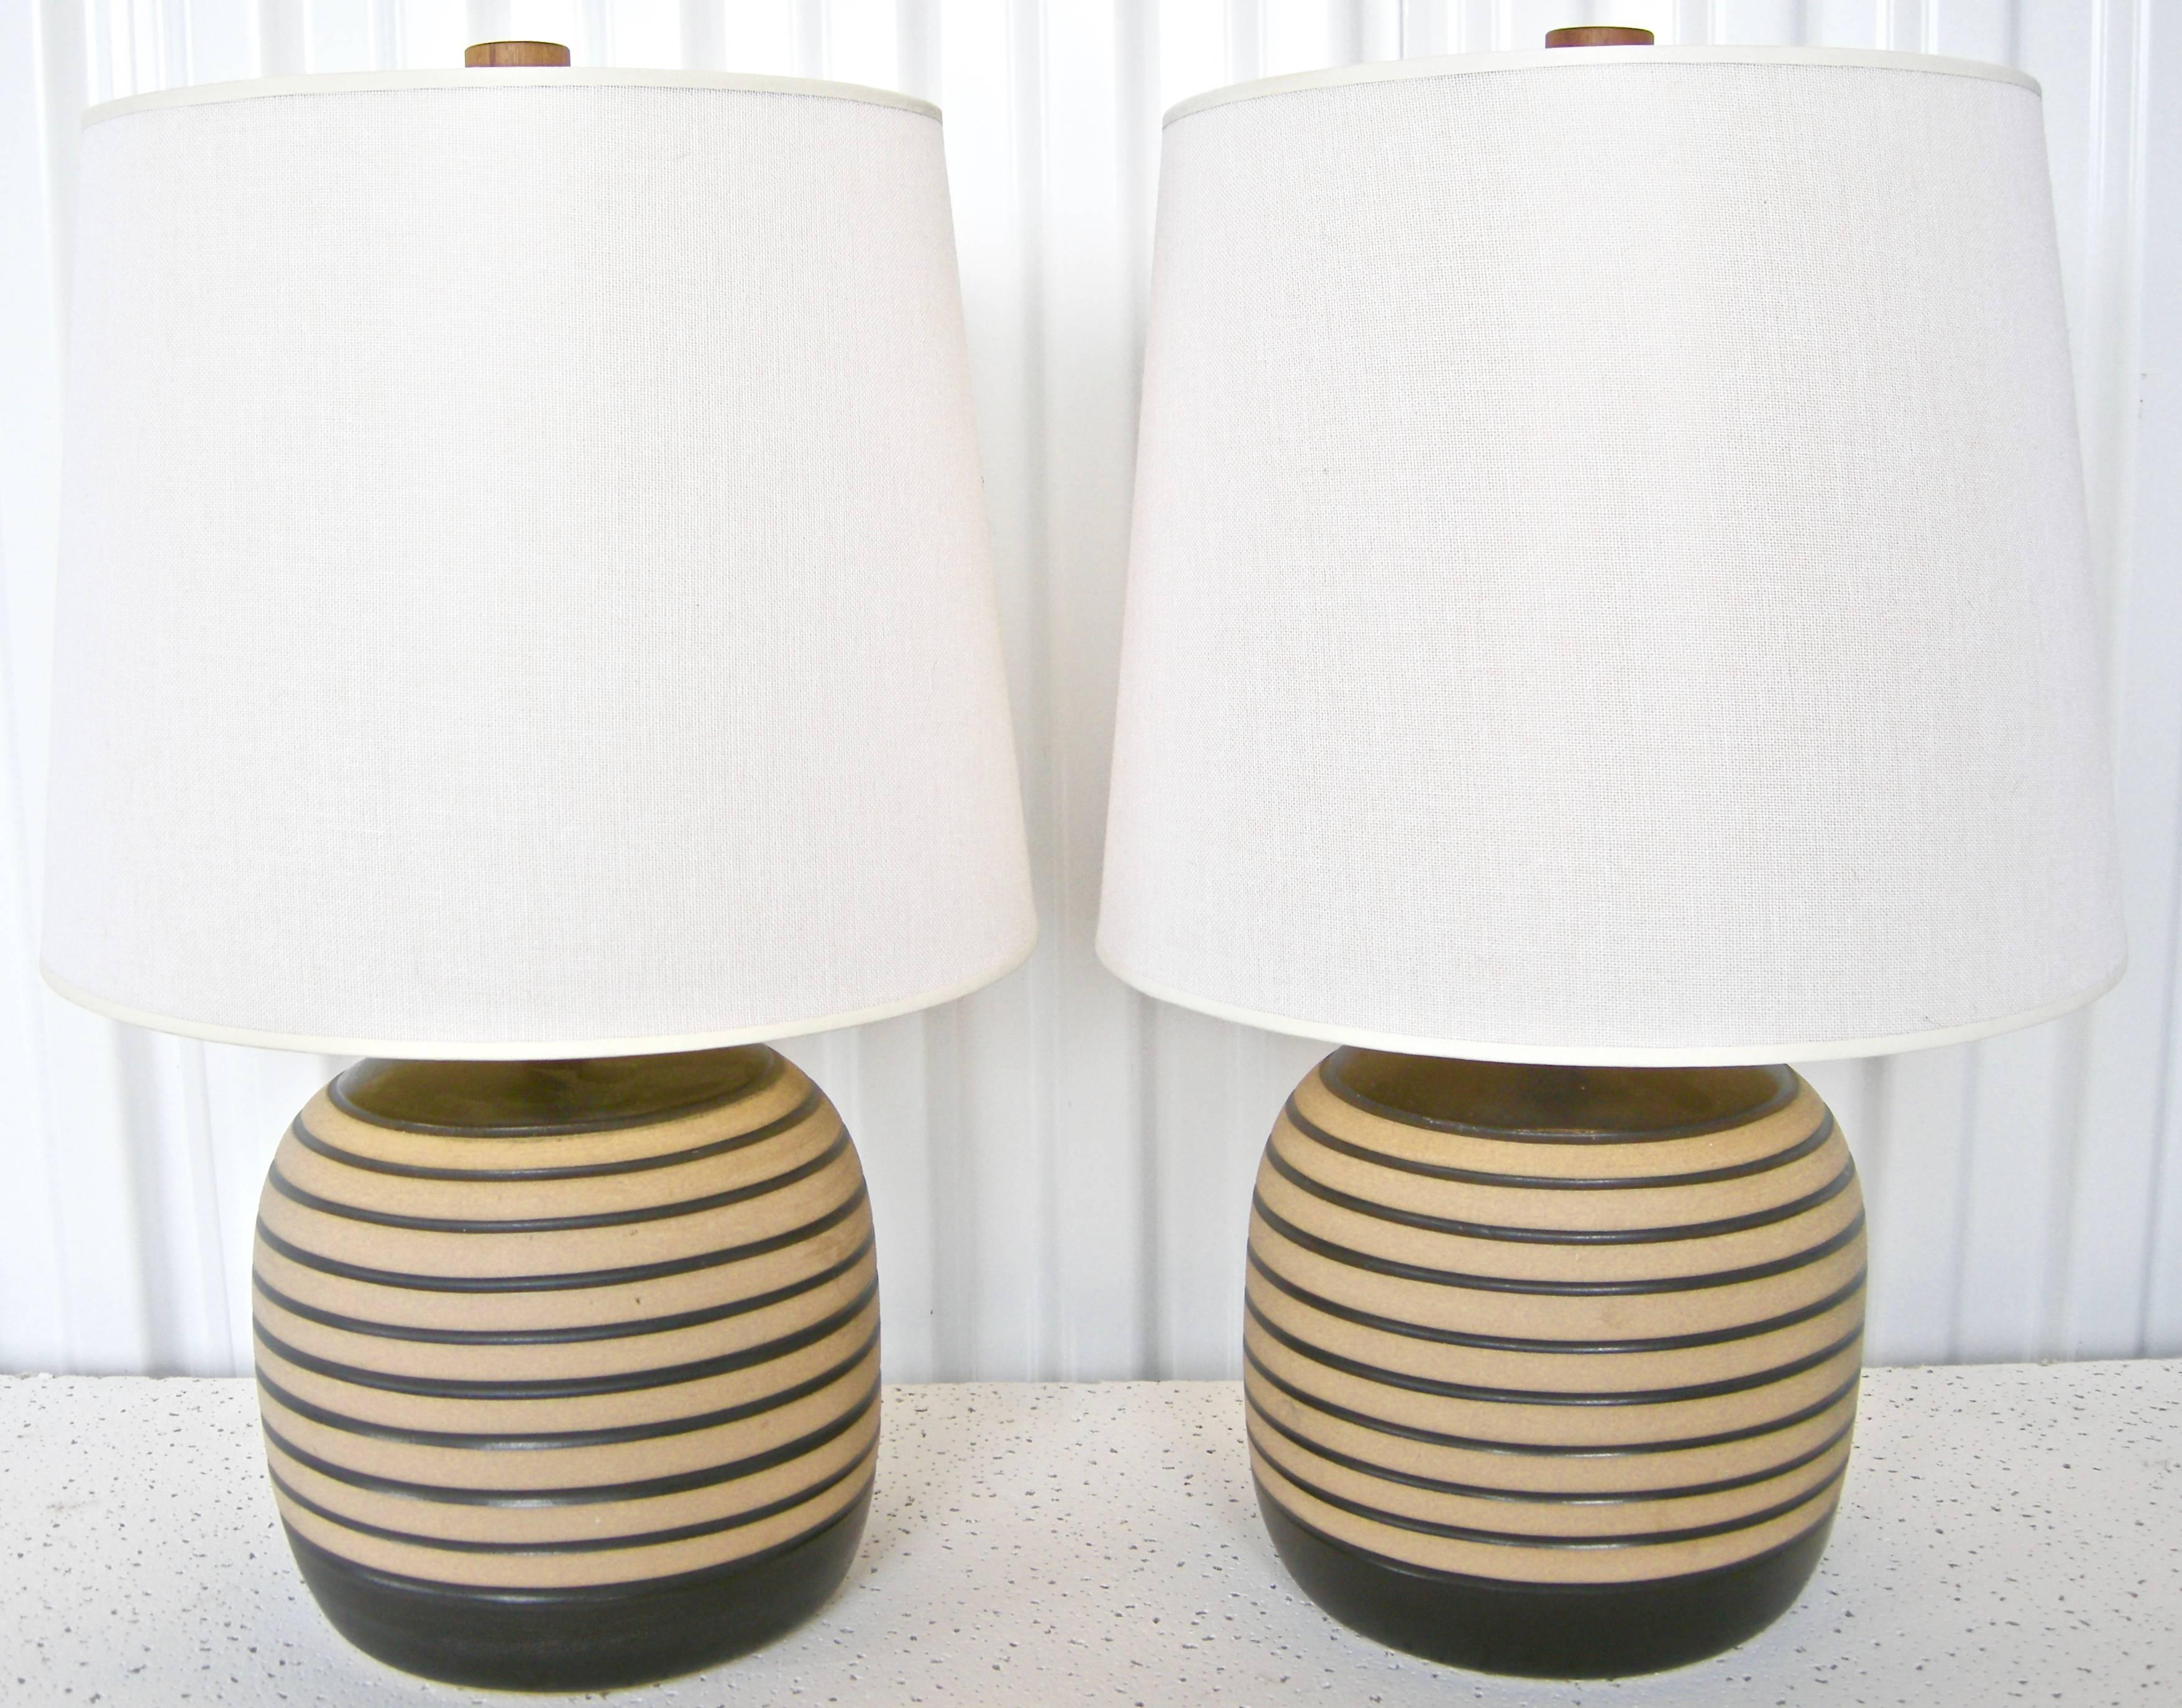 Terrific pair of vintage, Gordon Martz, table lights. Highly graphic and unique stacked ring design of bases in soft tan and brown palettes. Original shades and wooden finials. H below to finial top.Shade: 10